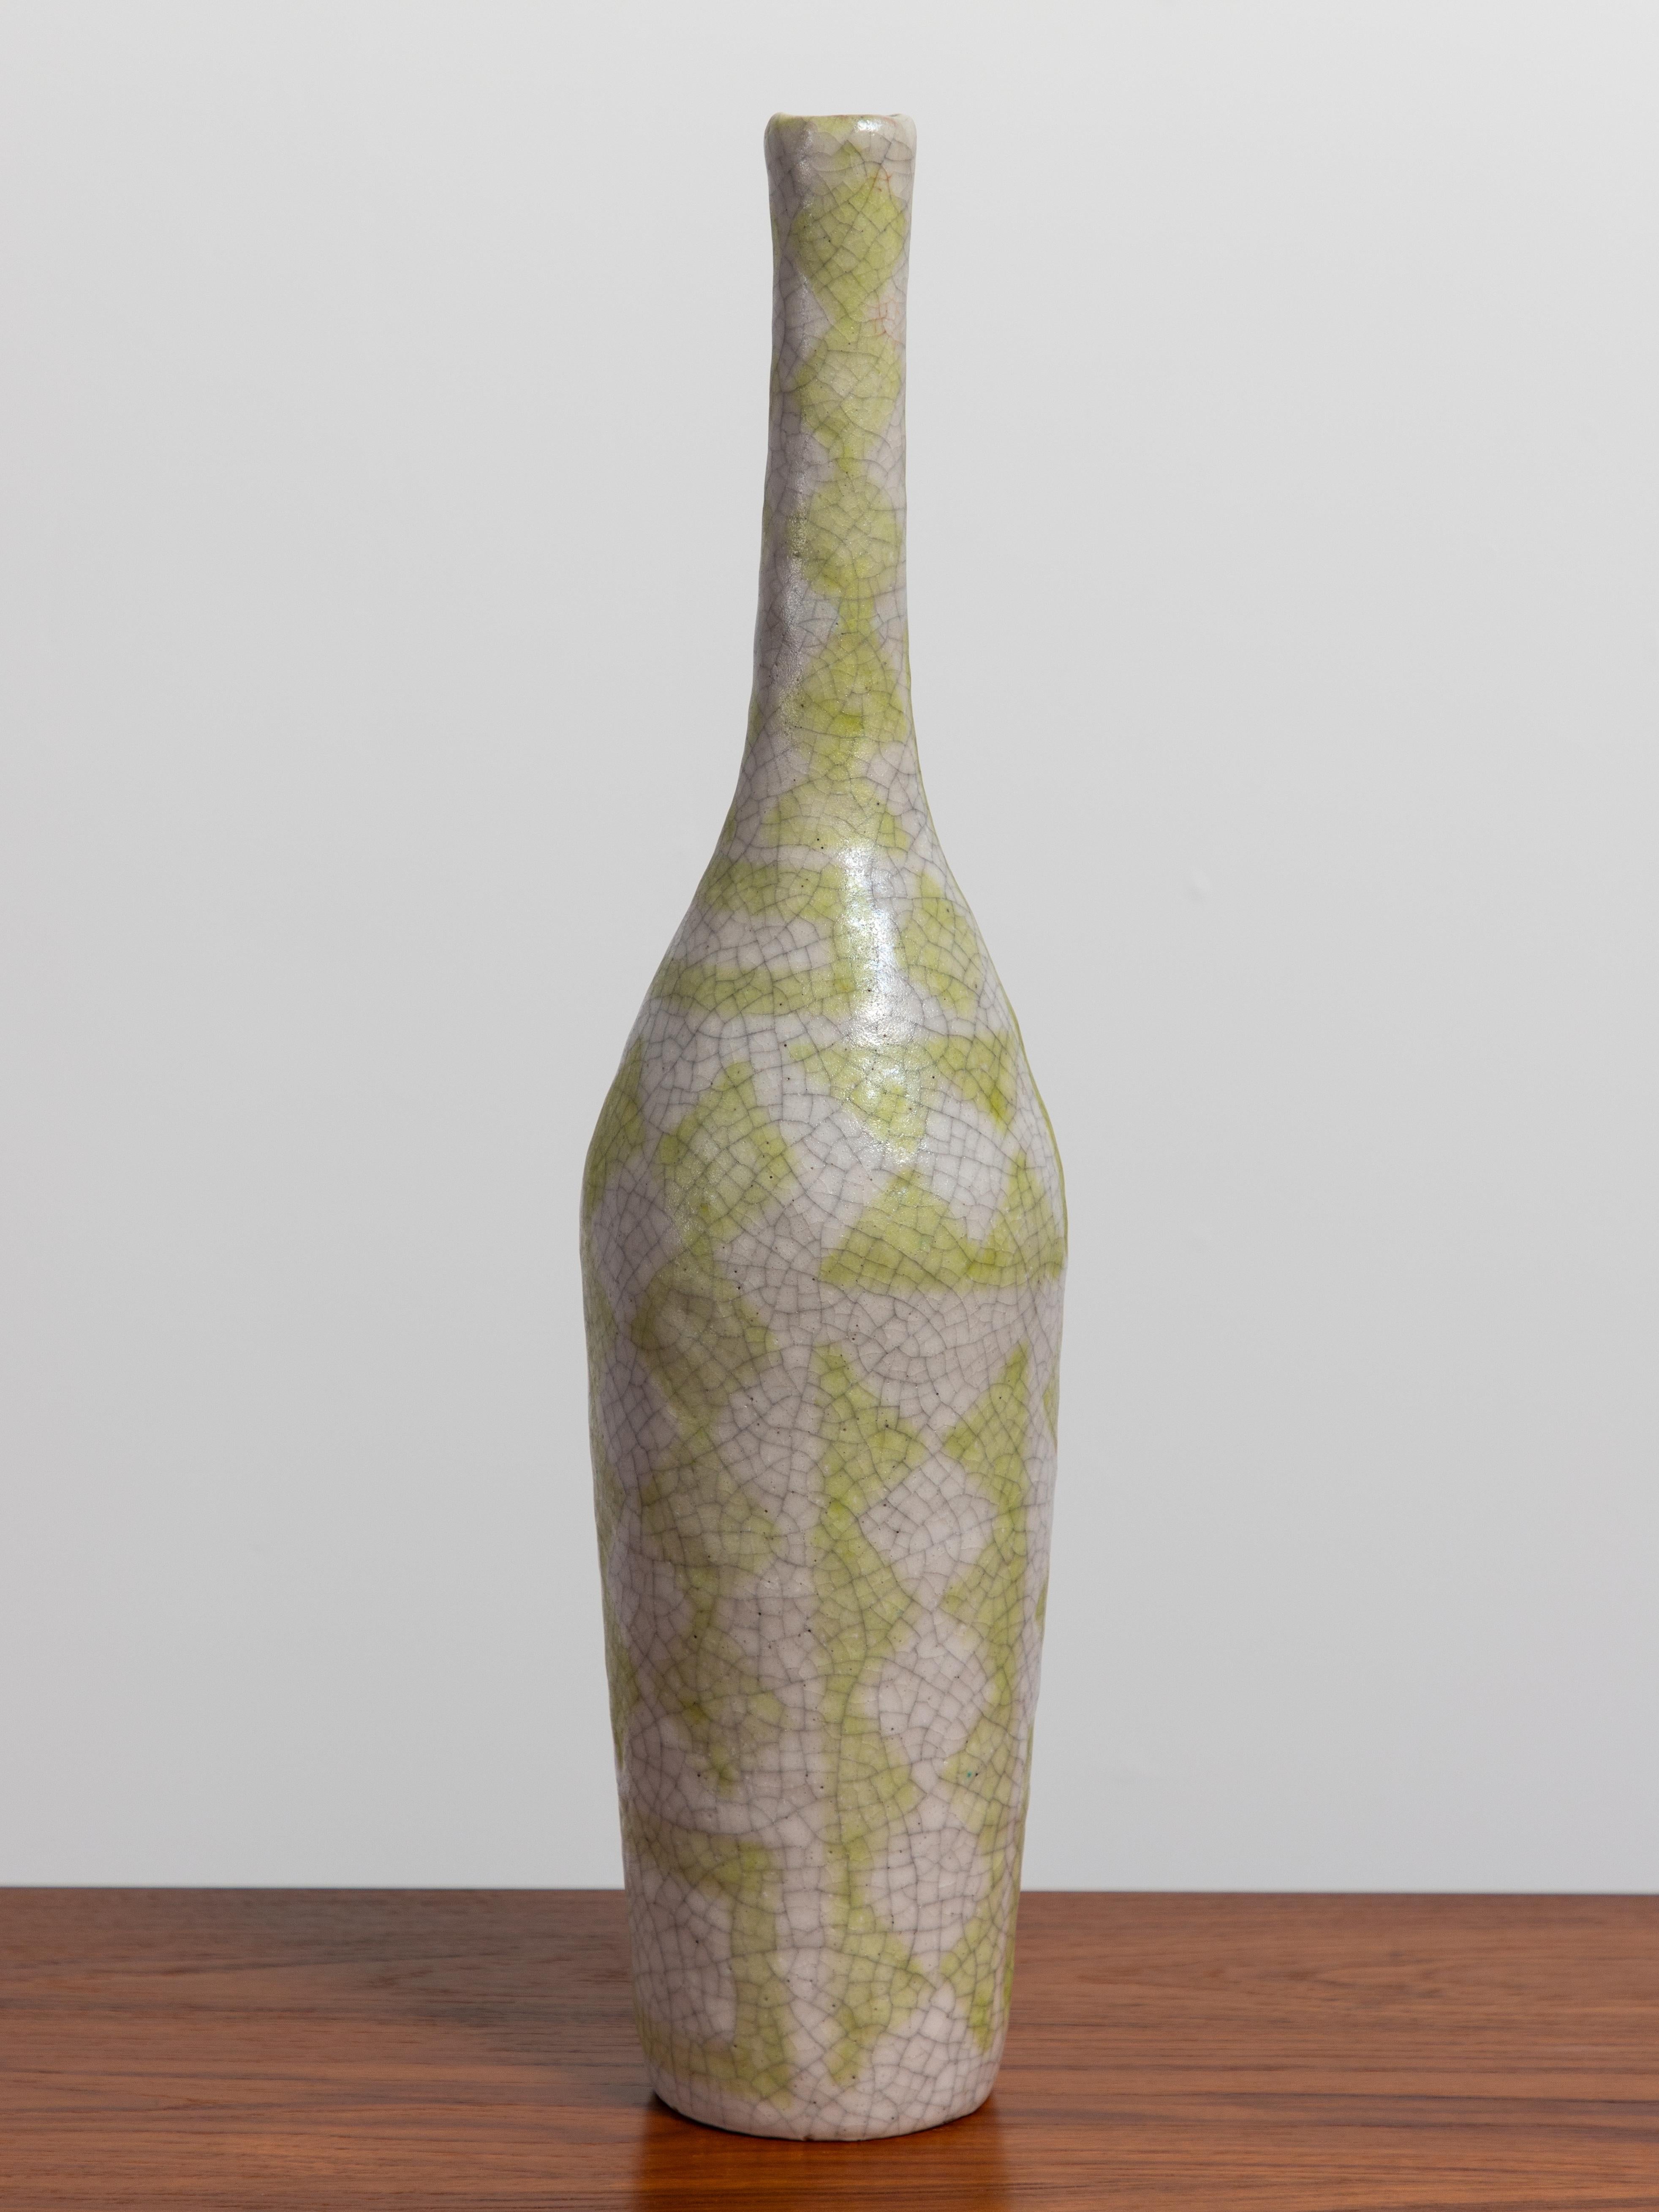 Stunning expressionist bottle vase by Guido Gambone. Vase is decorated with a vibrant geometric pattern all over, in a striking citron yellow that pops against a white background. The craqueleure finish on the glazed stoneware enhances the rustic